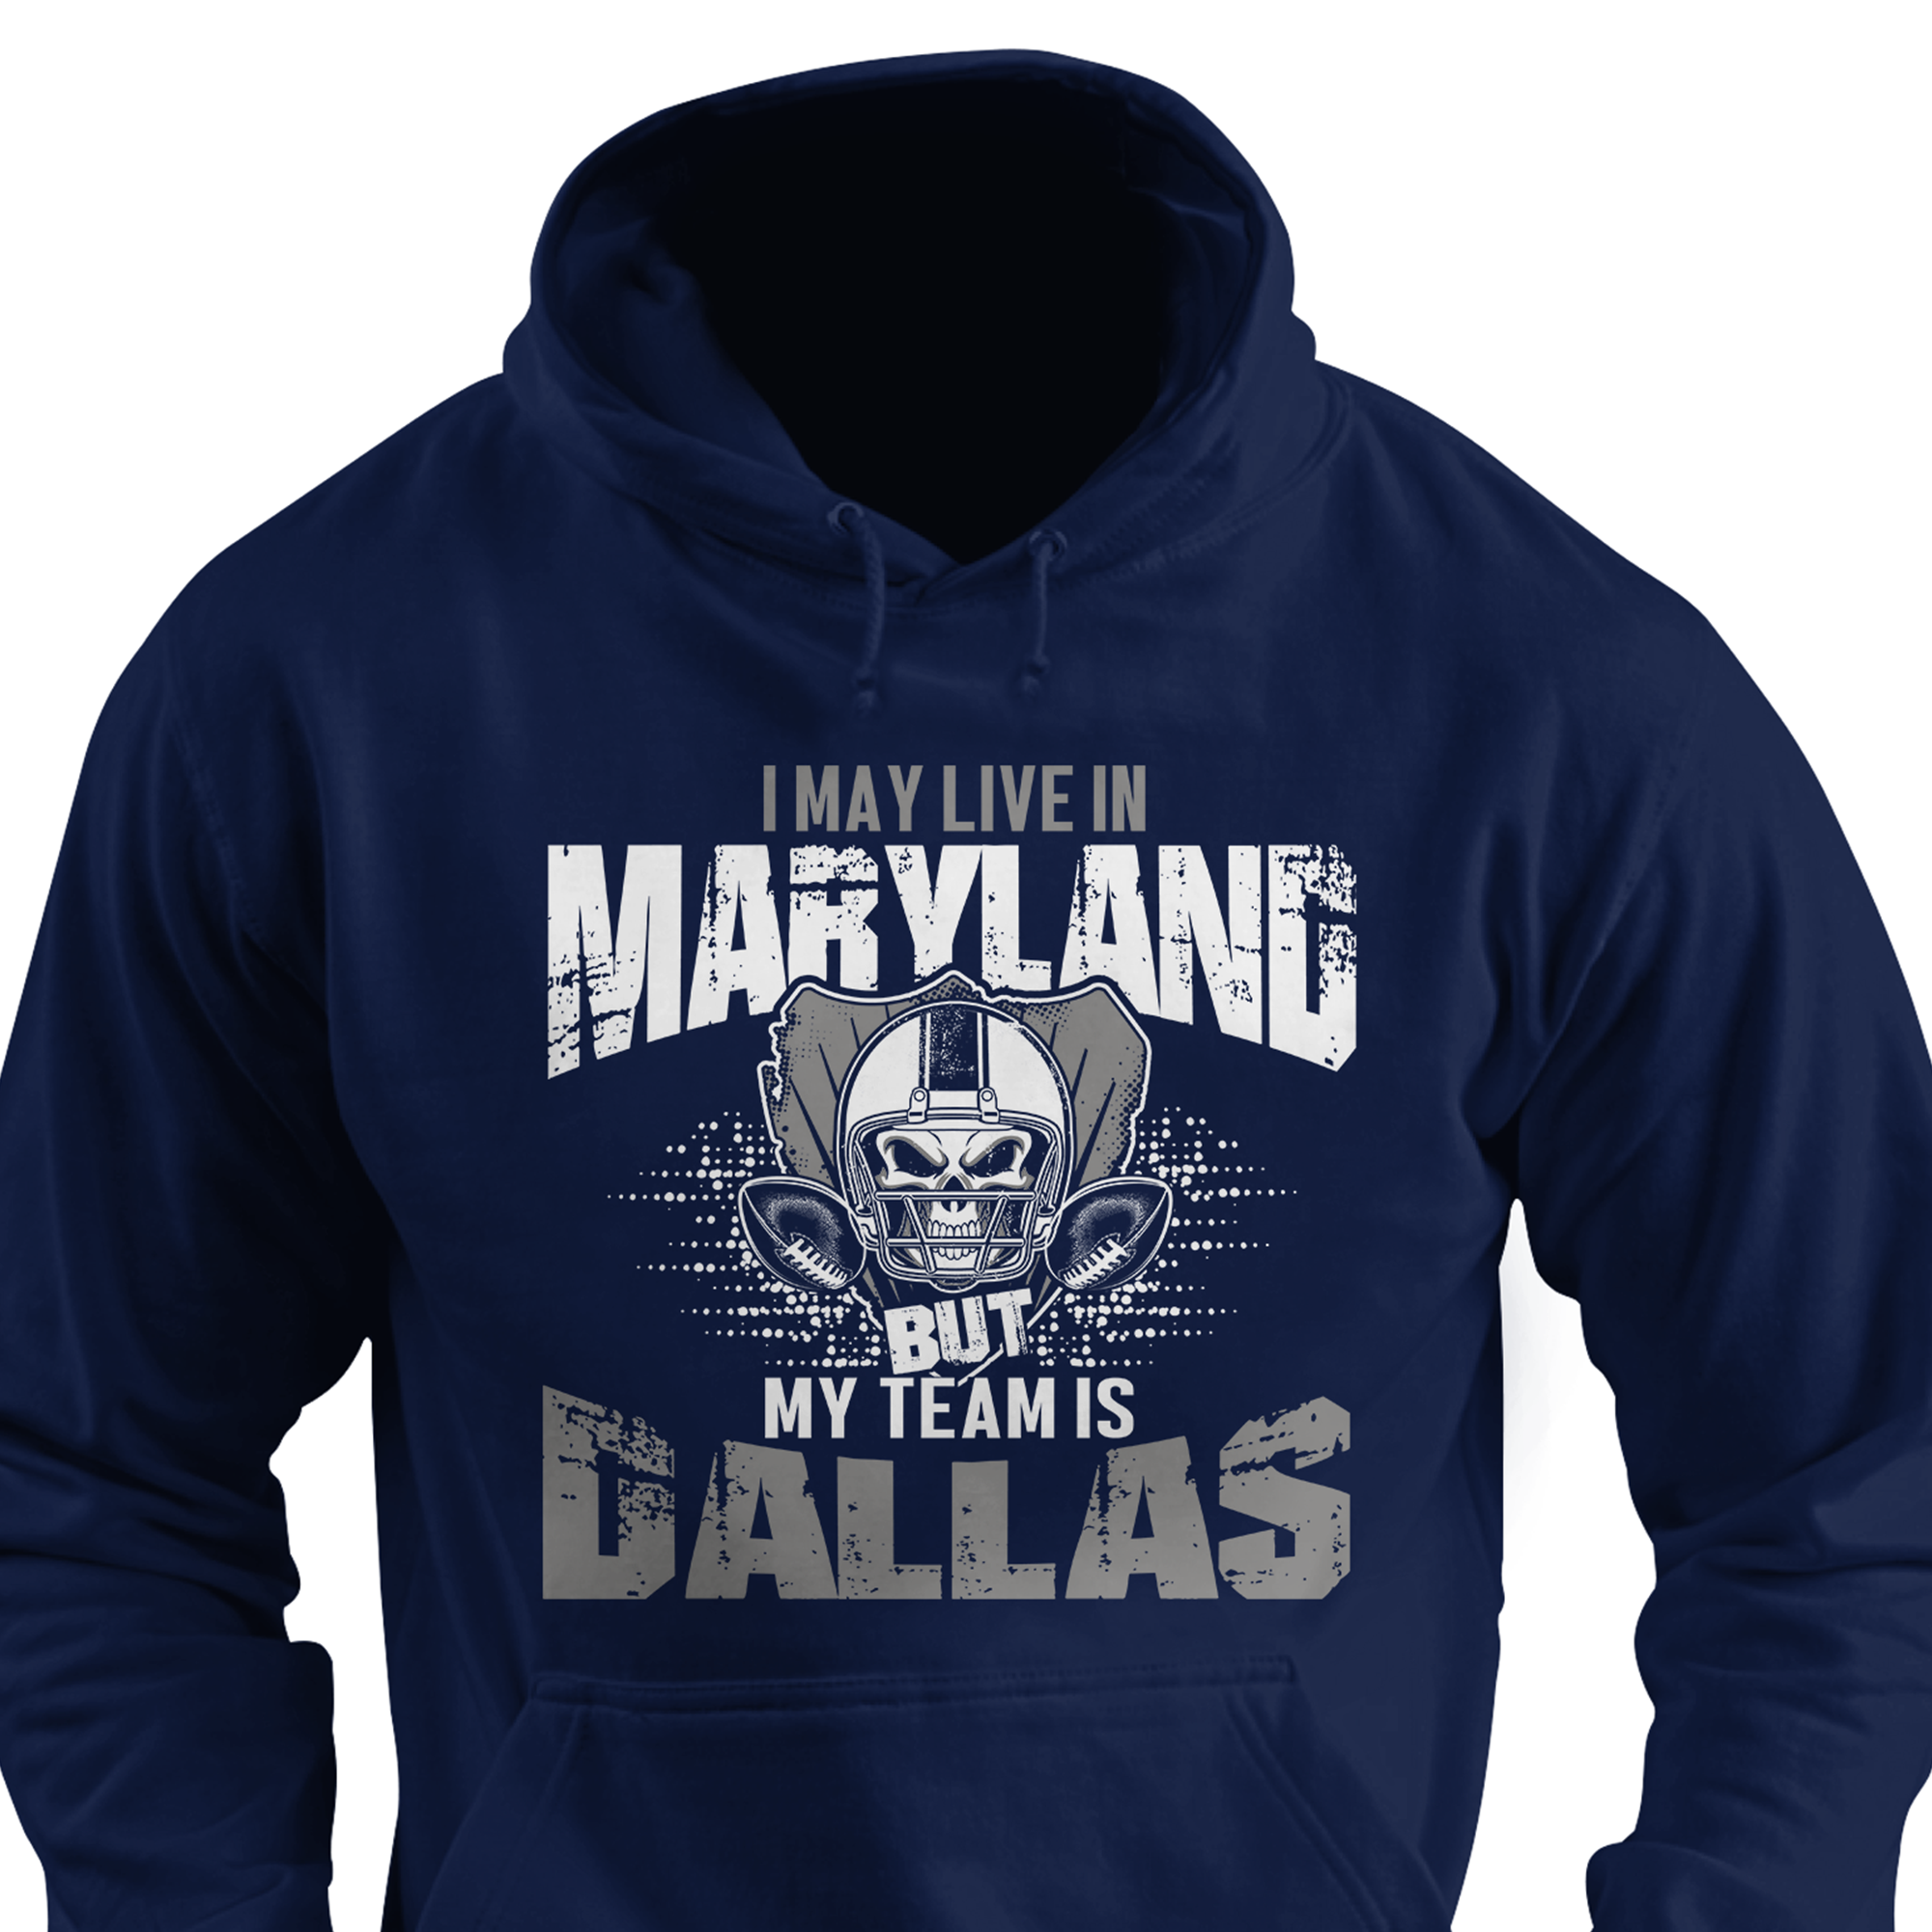 I may live in Maryland but my team is Dallas